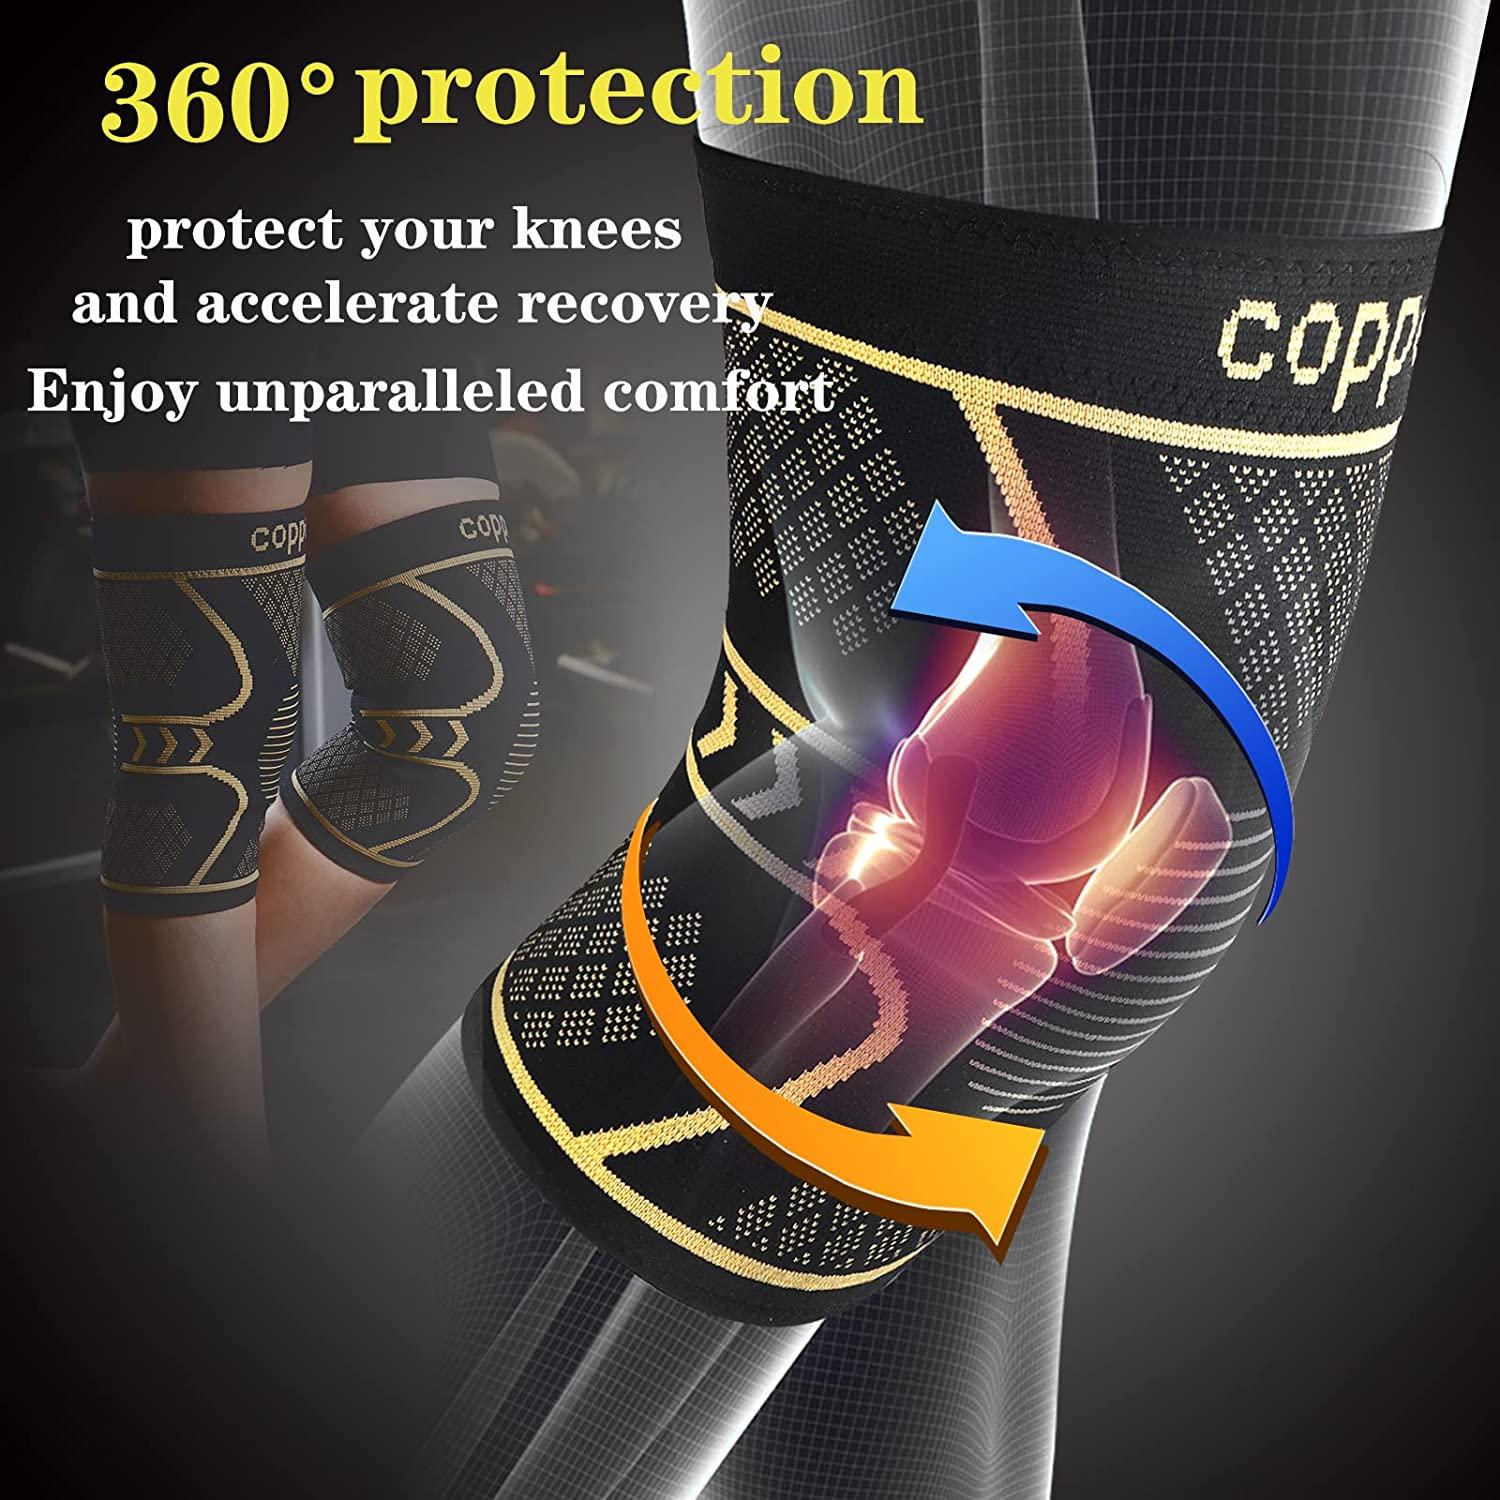 Copper Knee Braces for Knee Pain 2 Pack, Knee Compression Sleeve Support  for Men and Women, Medical Grade Knee Pads for Running, Hiking, Working,  Arthritis, ACL, Meniscus Tear, Joint Pain Relief Black+copper